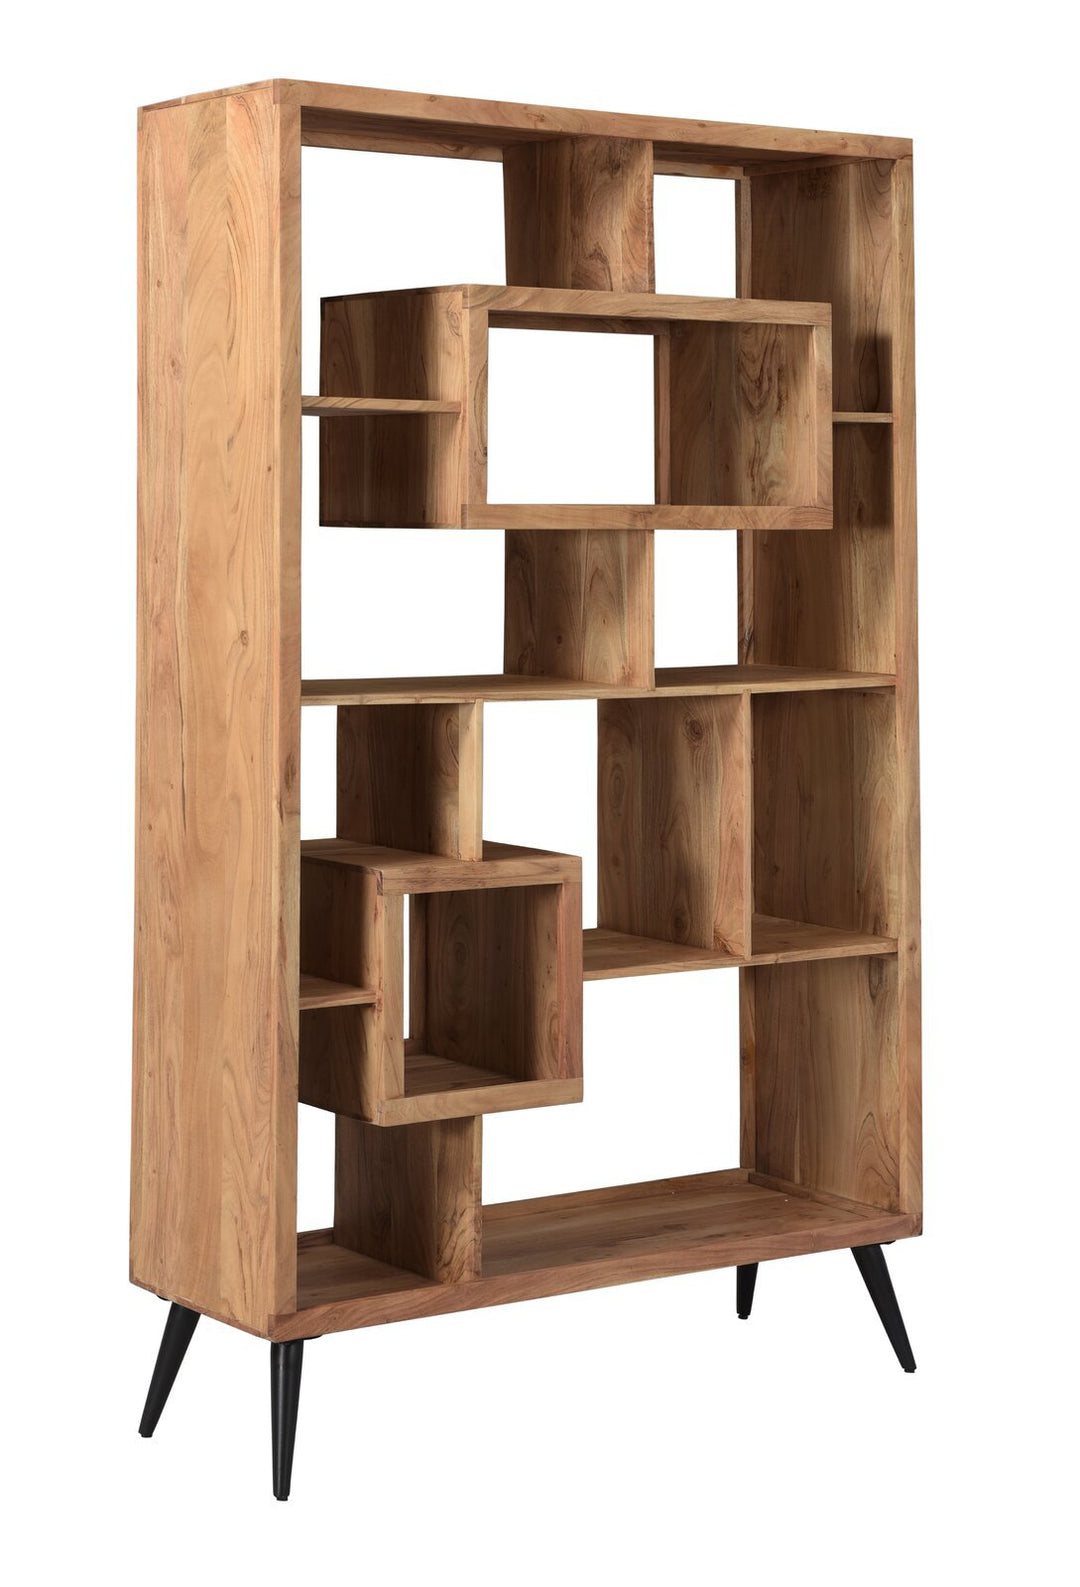 Bookshelf made of solid acacia wood and carbon steel - INMARWAR